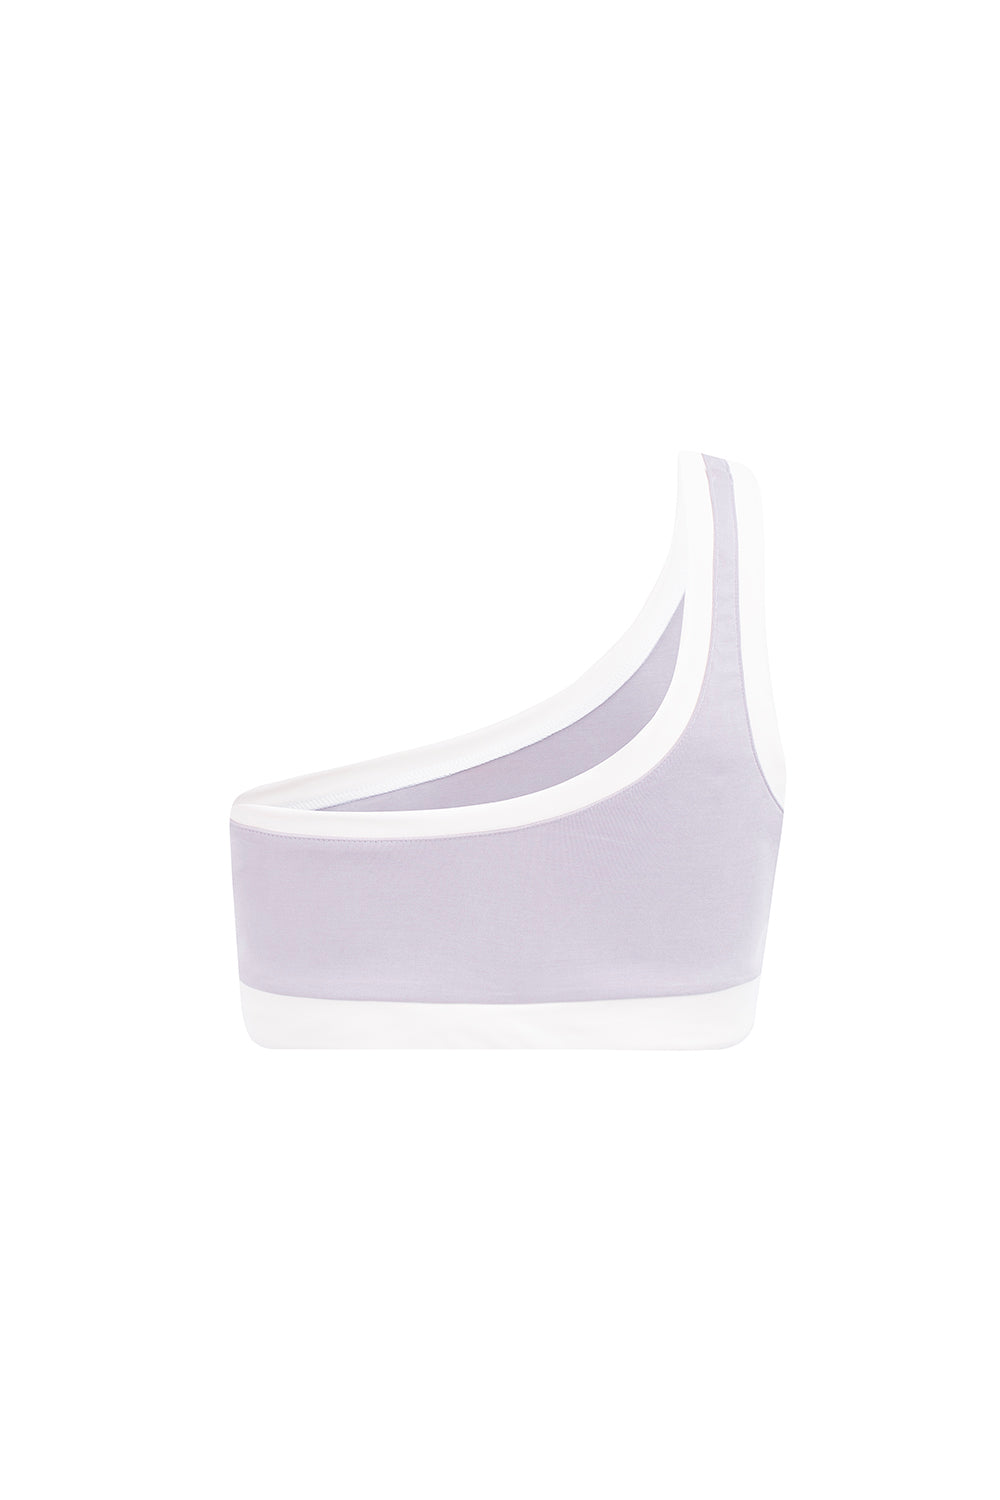 SOFT TOUCH ONE SHOULDER LILAC CROP TOP V1